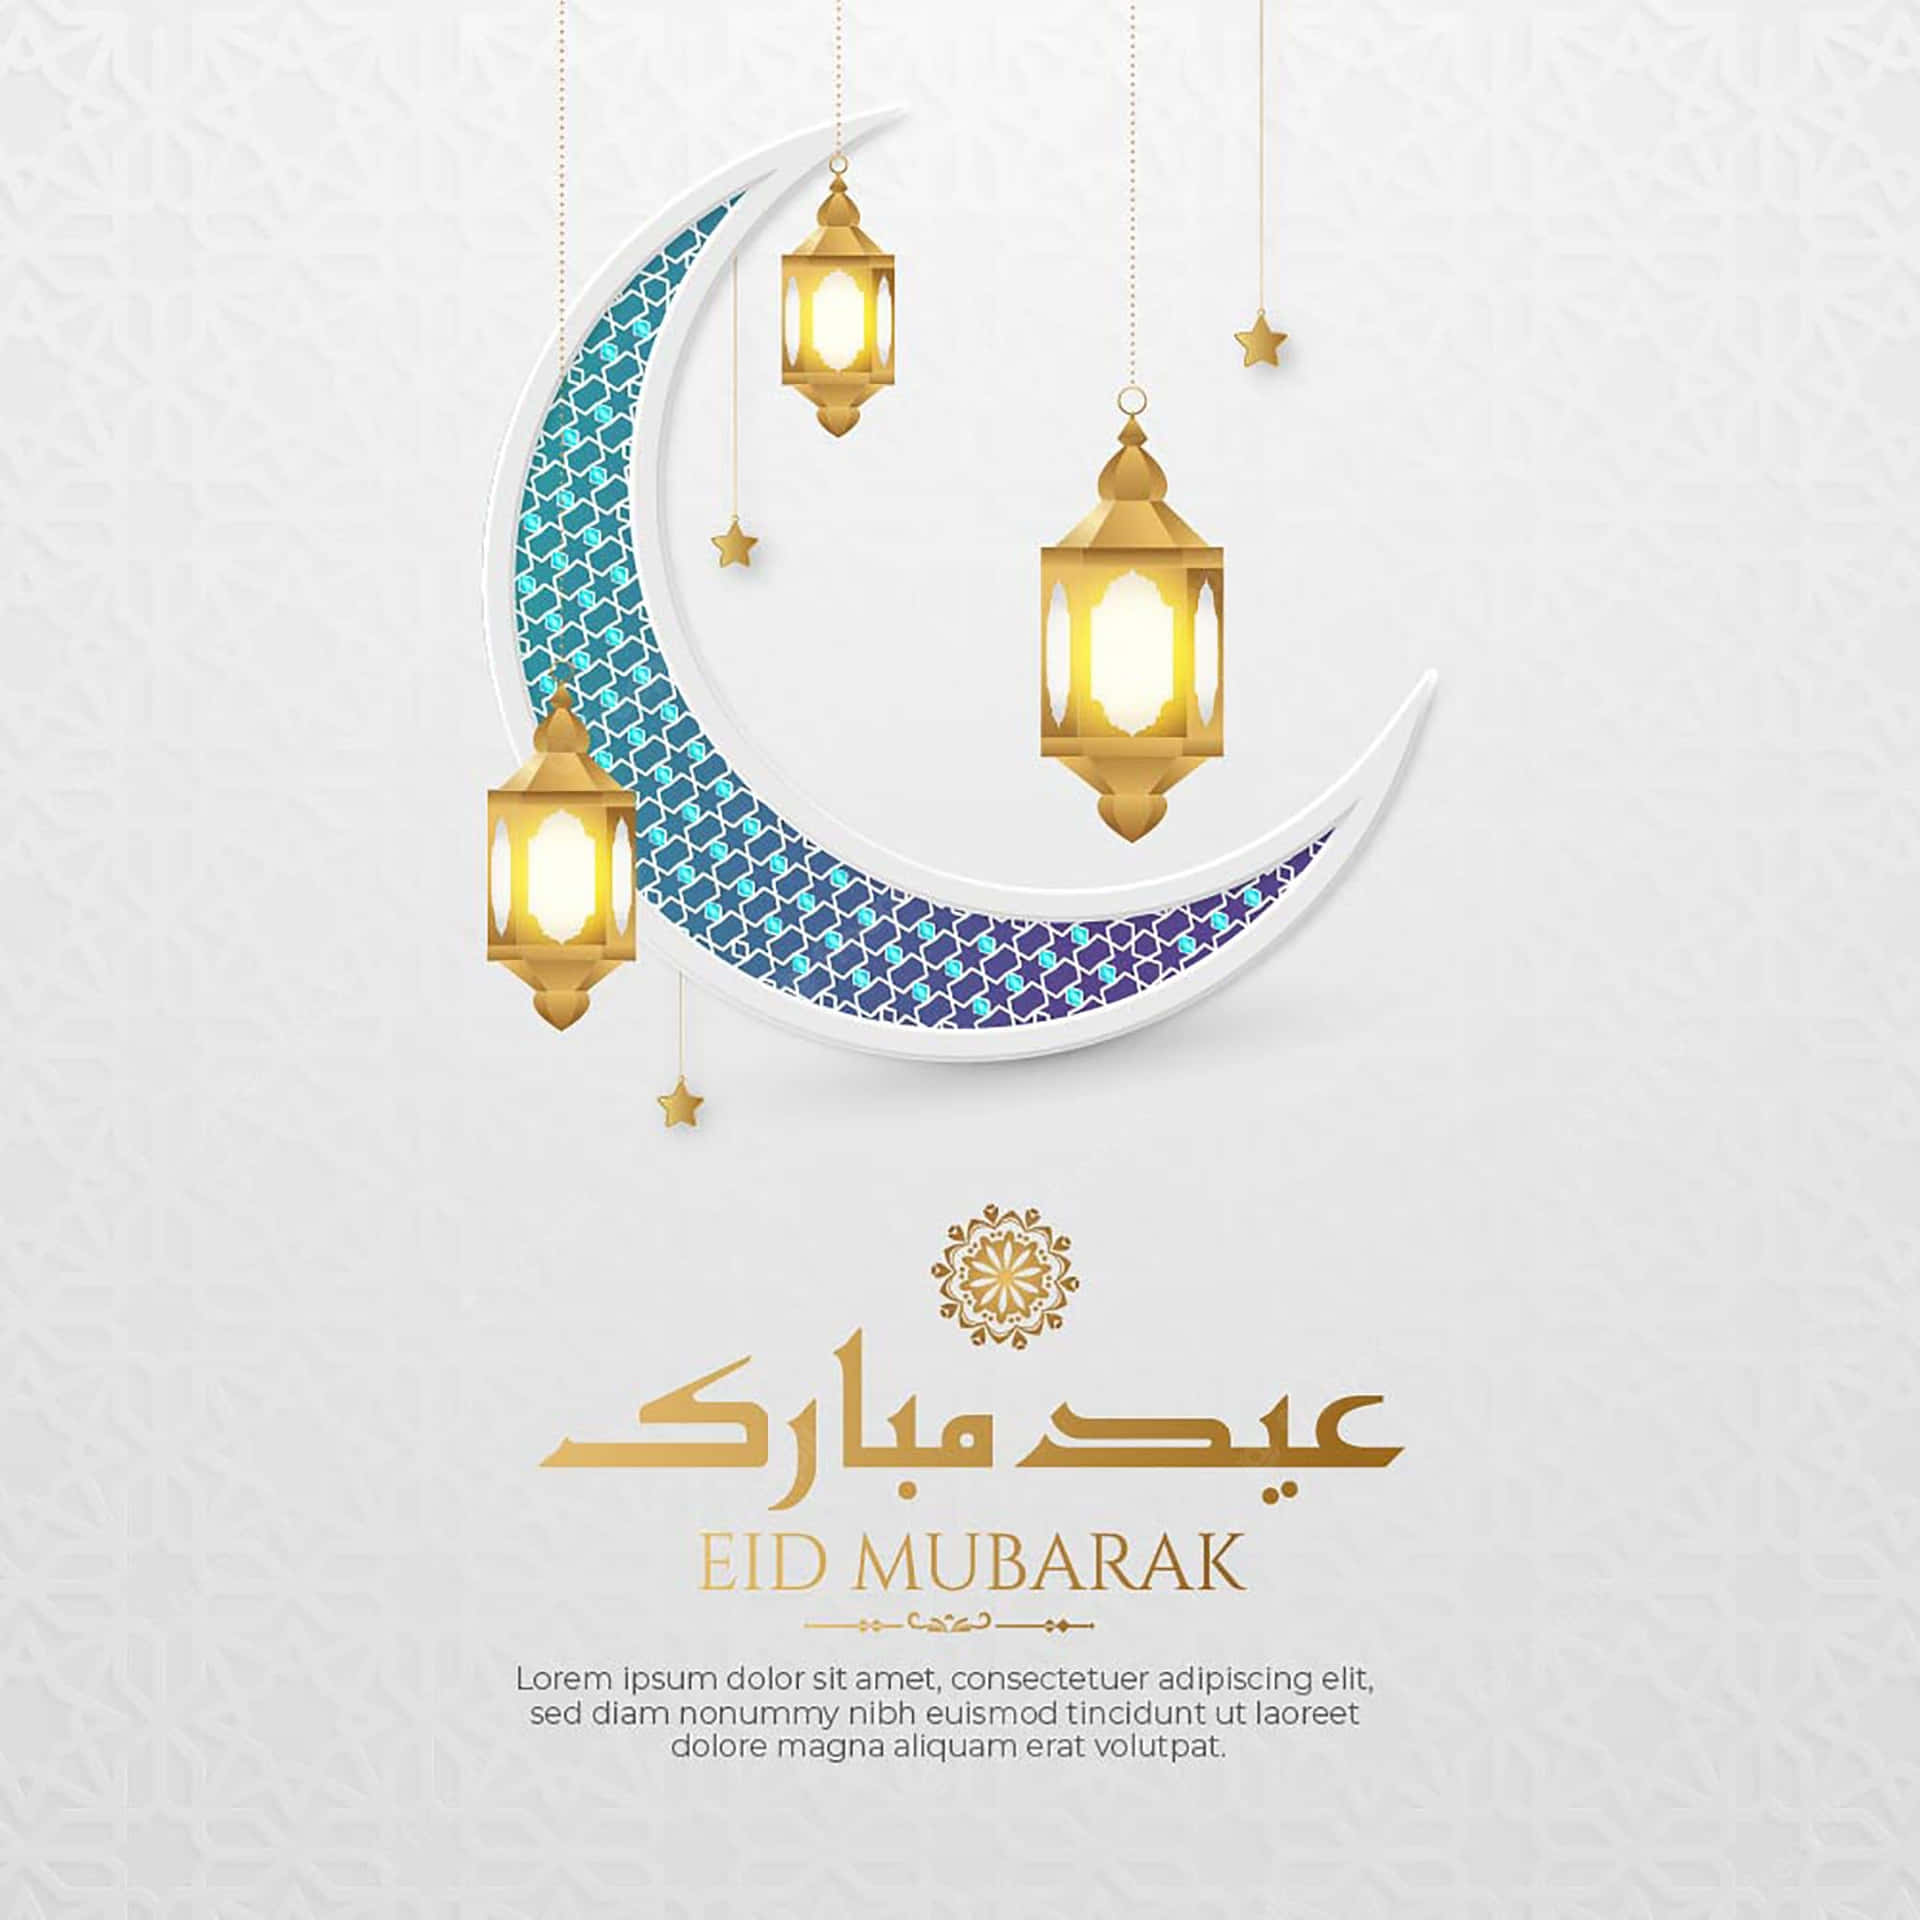 Celebrate Eid Mubarak with friends and family!